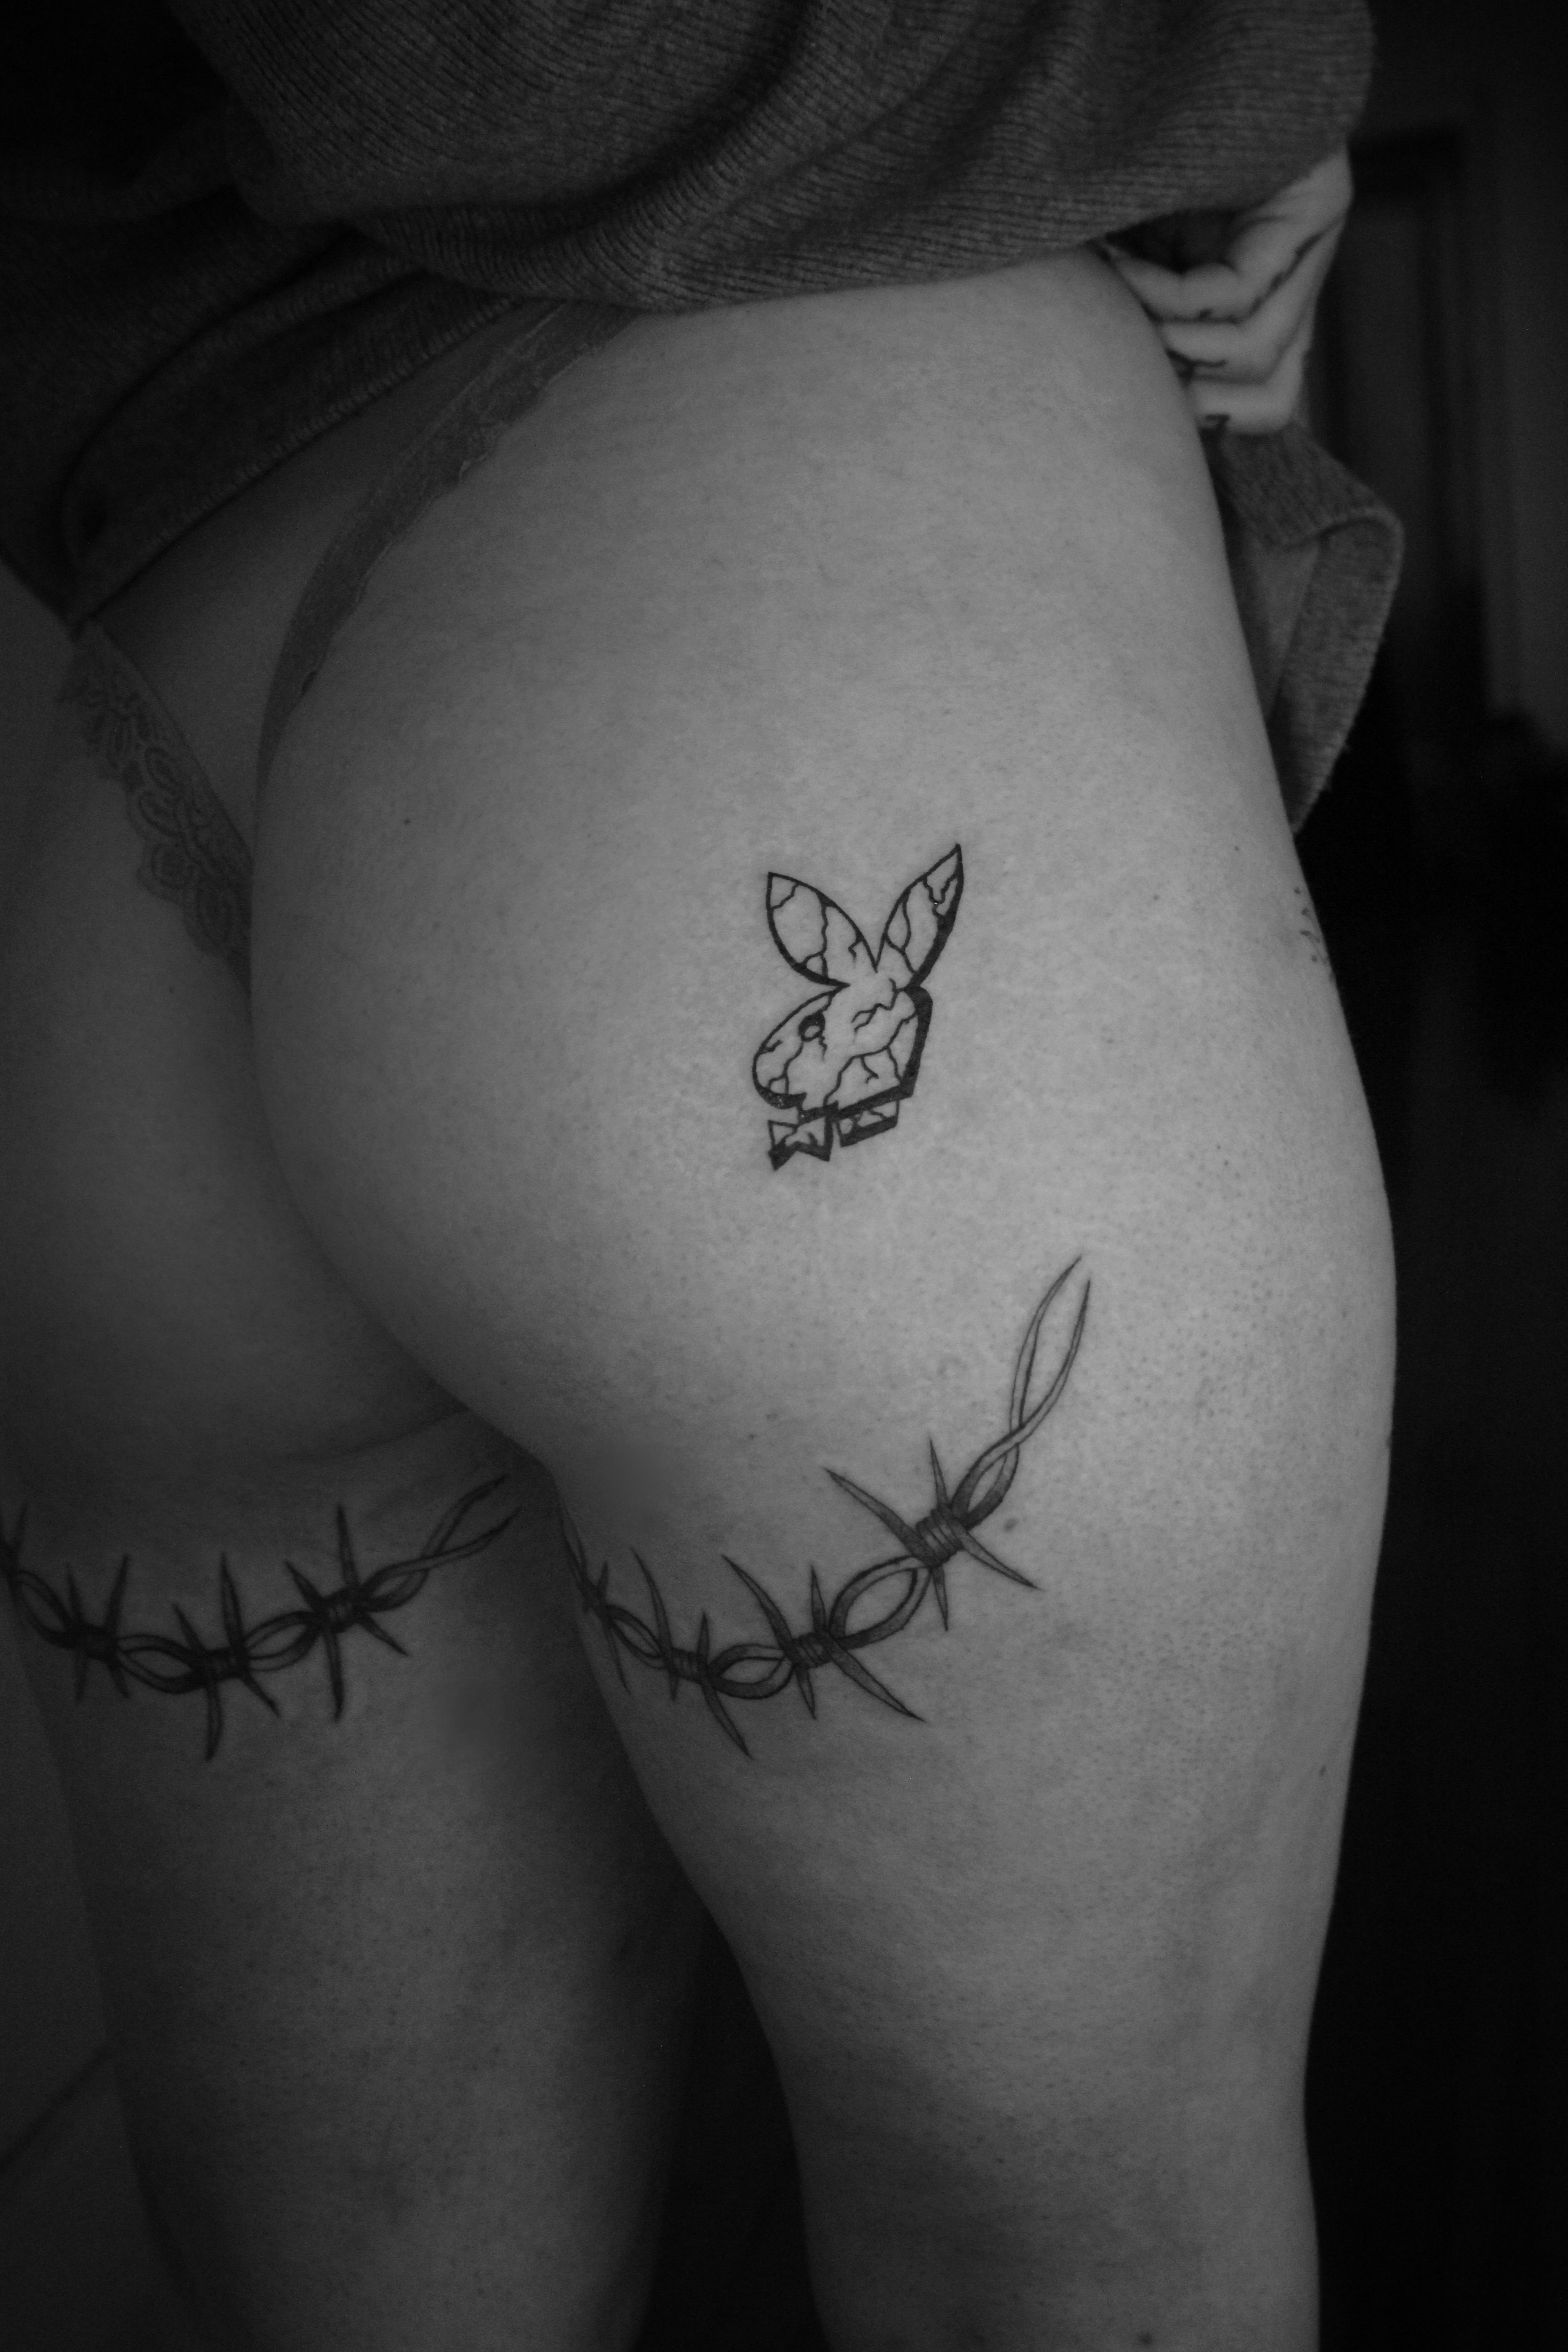 YOUR TATTOO IS BAD AND YOU SHOULD FEEL BAD — seriously it's like the worst  attempt at an ass...